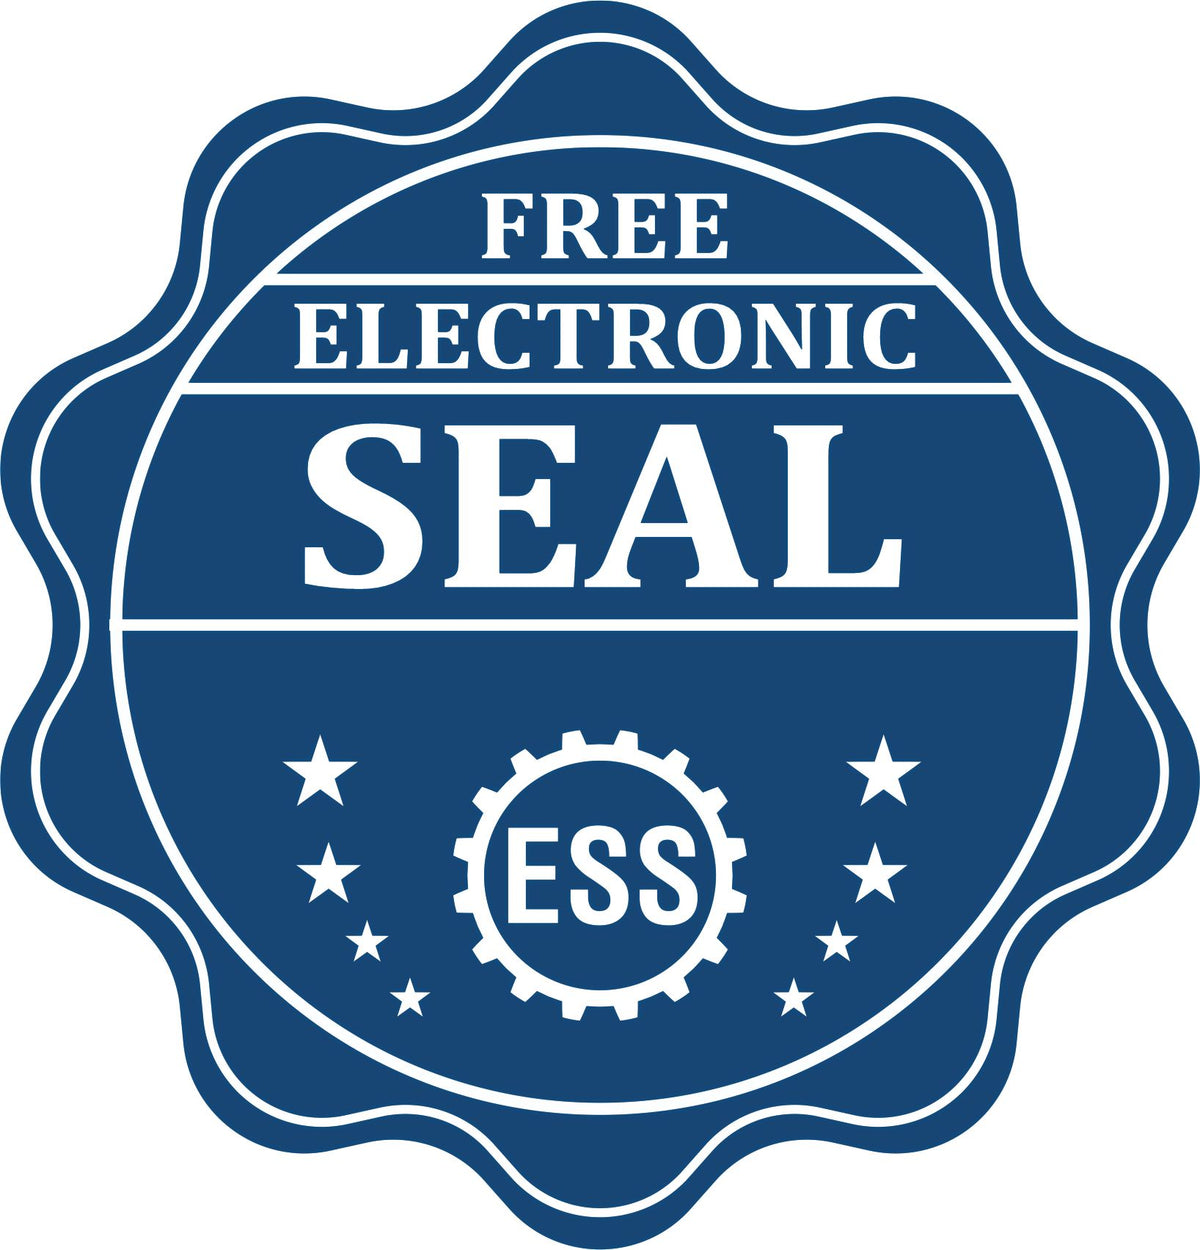 A badge showing a free electronic seal for the Handheld Maine Land Surveyor Seal with stars and the ESS gear on the emblem.